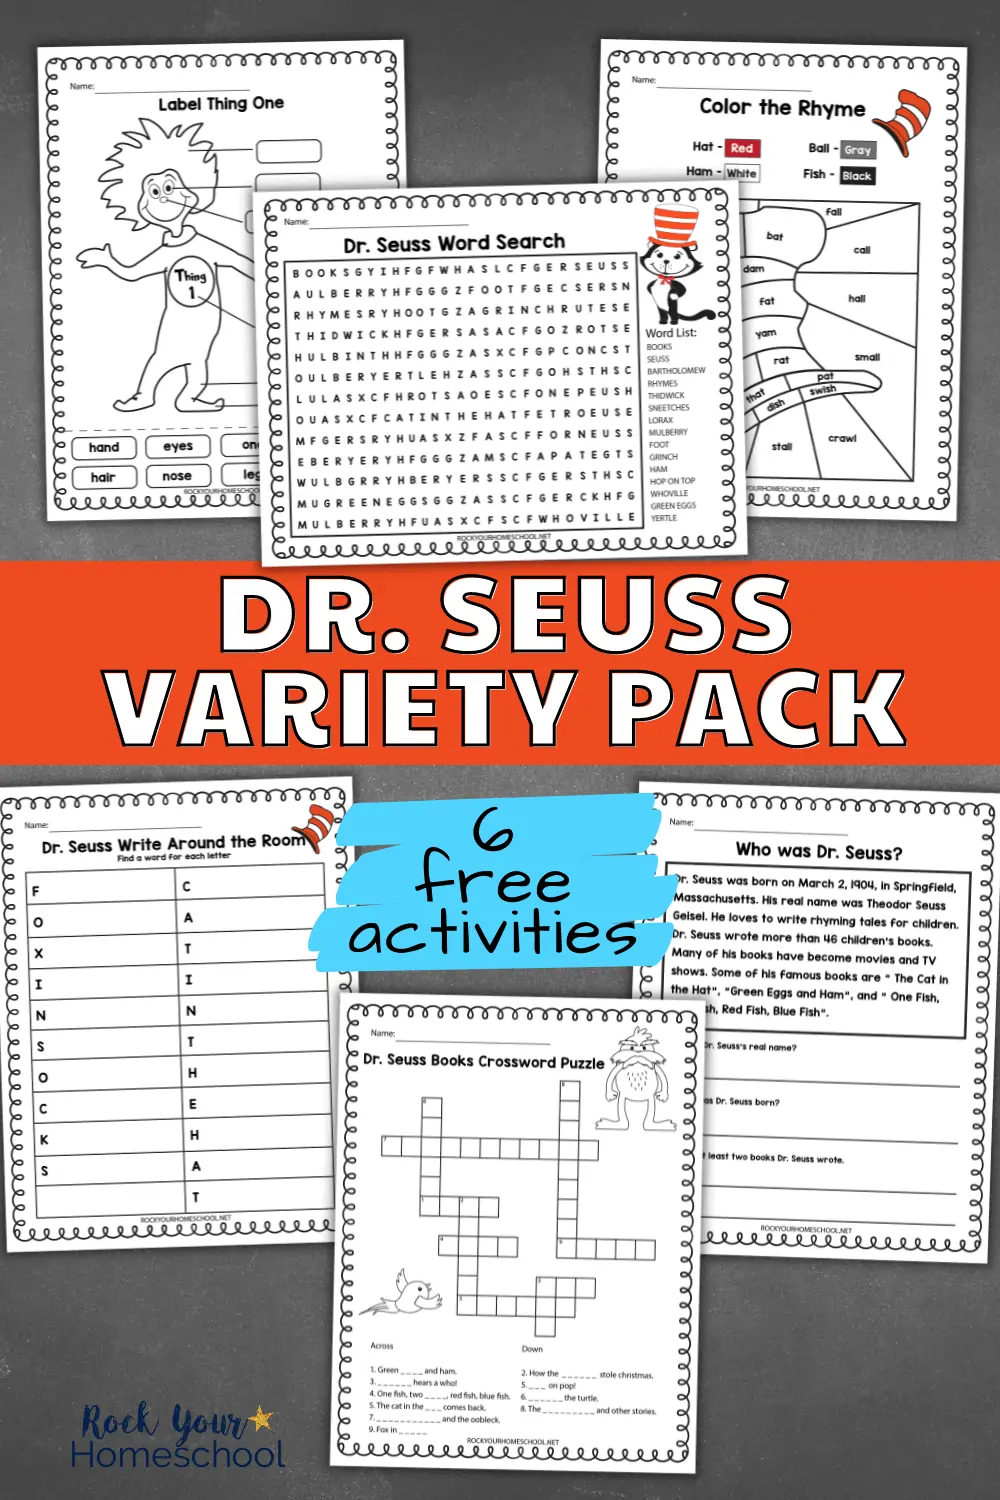 Free Dr. Seuss Activities Pack for Easy Ways to Boost Your Celebration